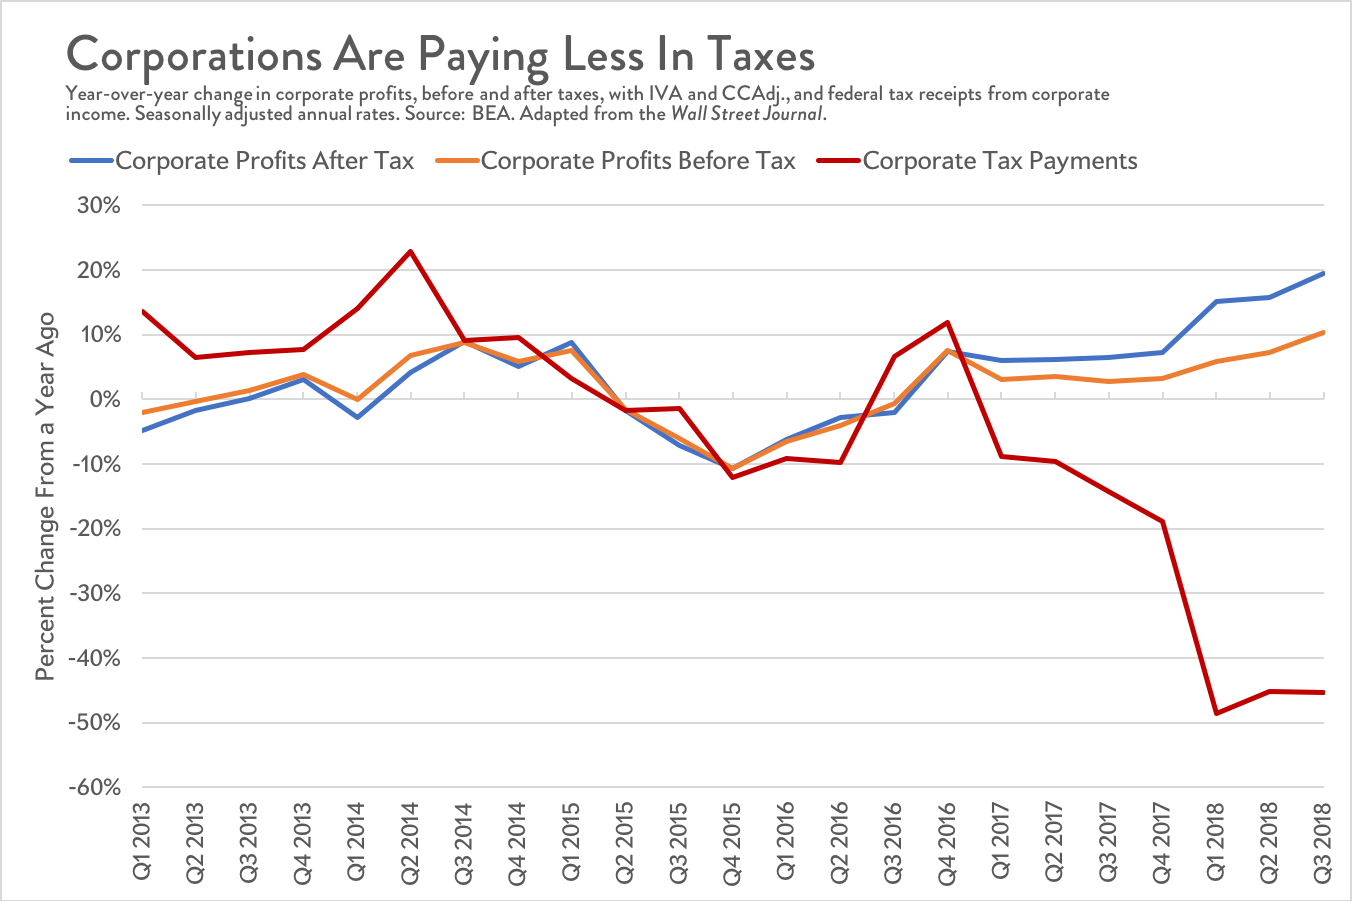 After-tax corporate profits